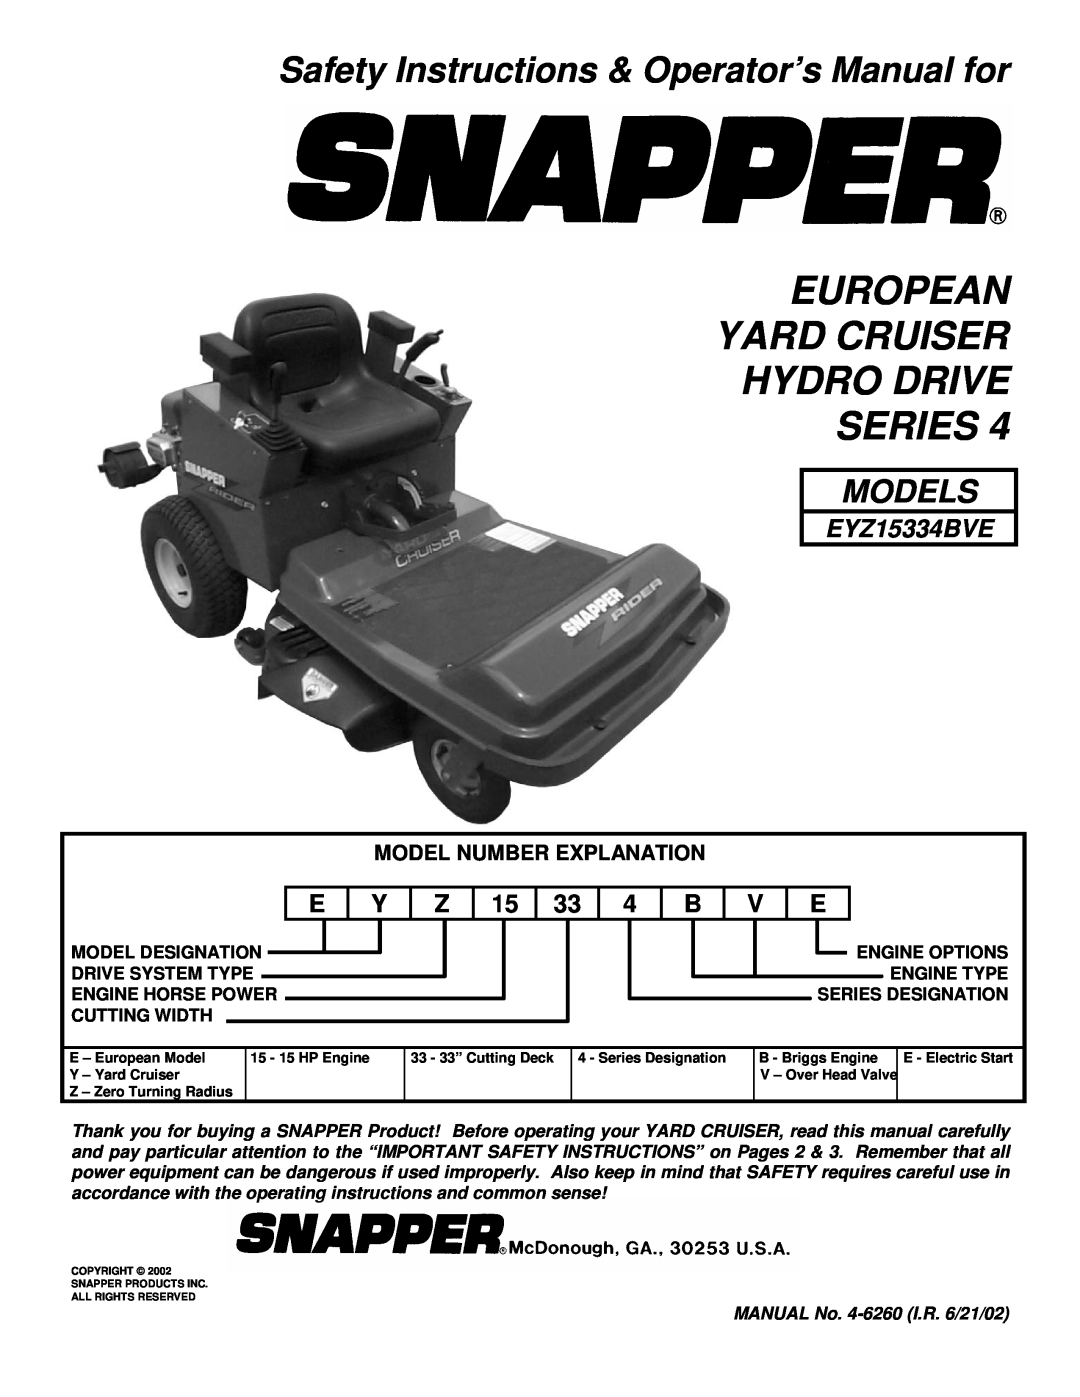 Snapper EYZ15334BVE important safety instructions Safety Instructions & Operator’s Manual for, Model Number Explanation 